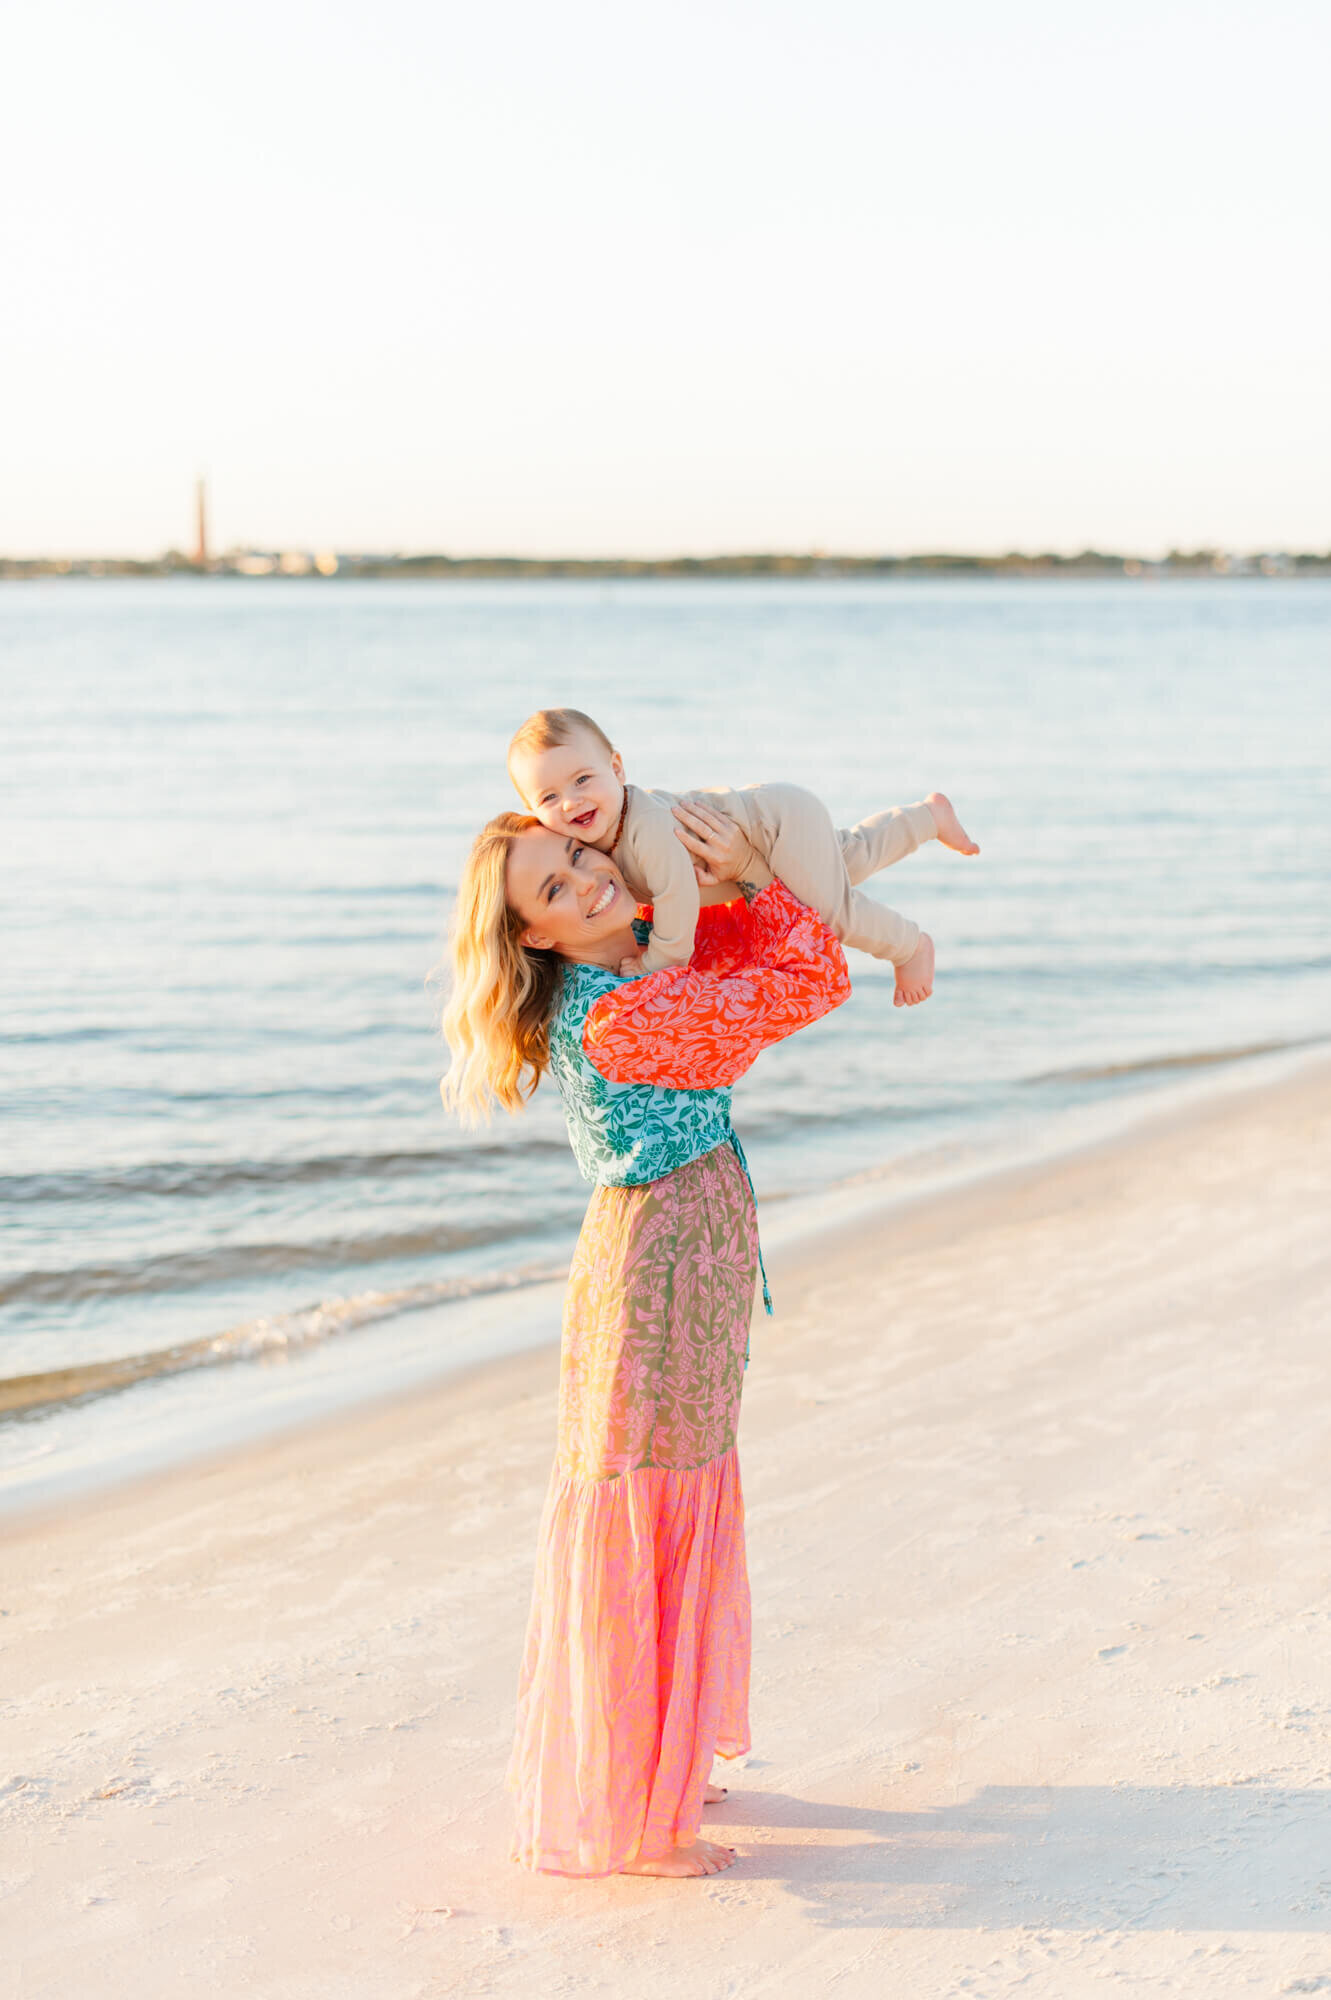 Melbourne Fl family photographer captures mother holding her young son near the shoreline in Melbourne Beach, Fl